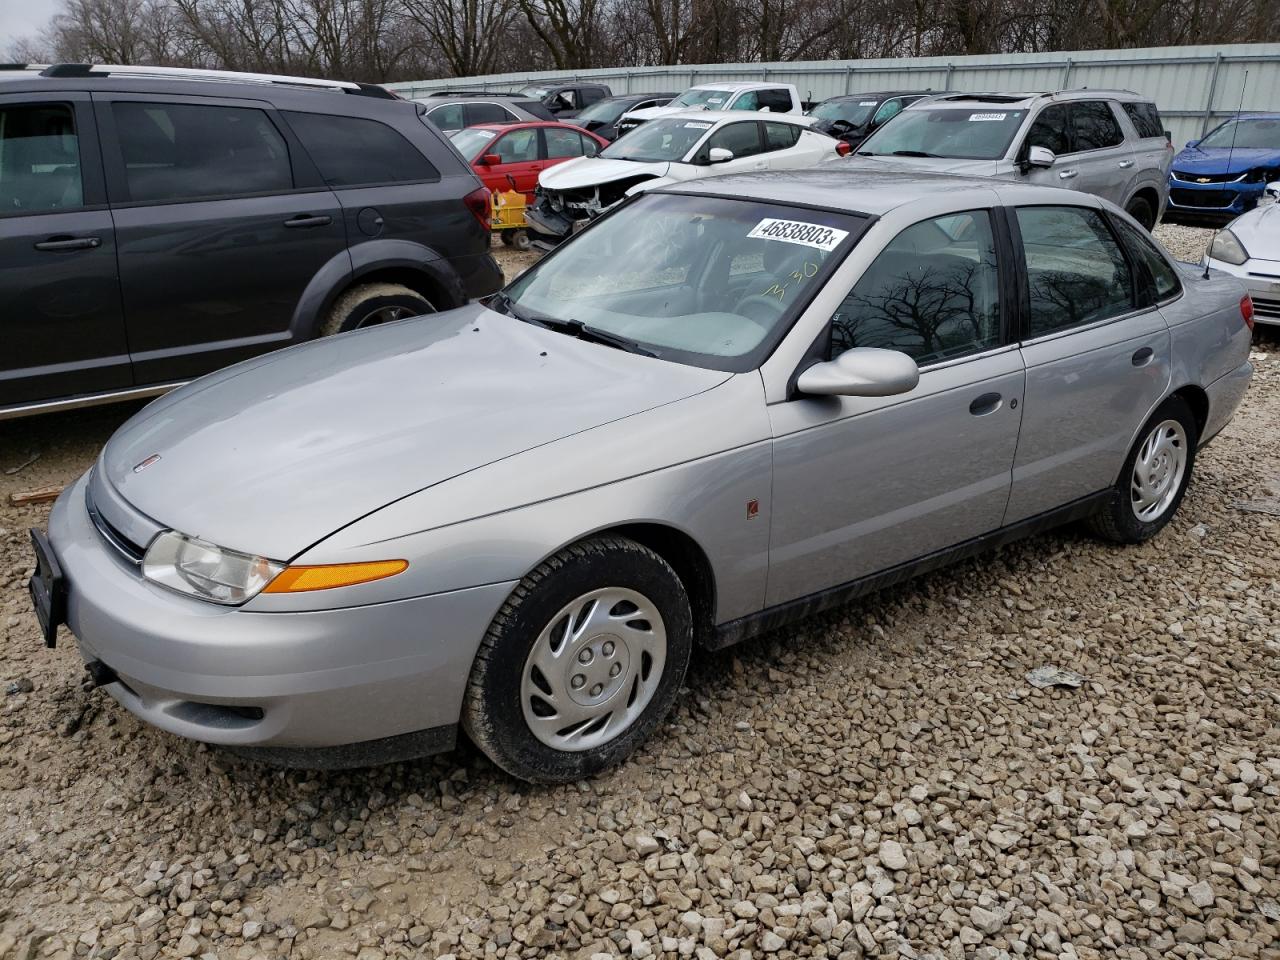 2000 Saturn LS for sale at Copart Franklin, WI Lot #46838*** |  SalvageReseller.com